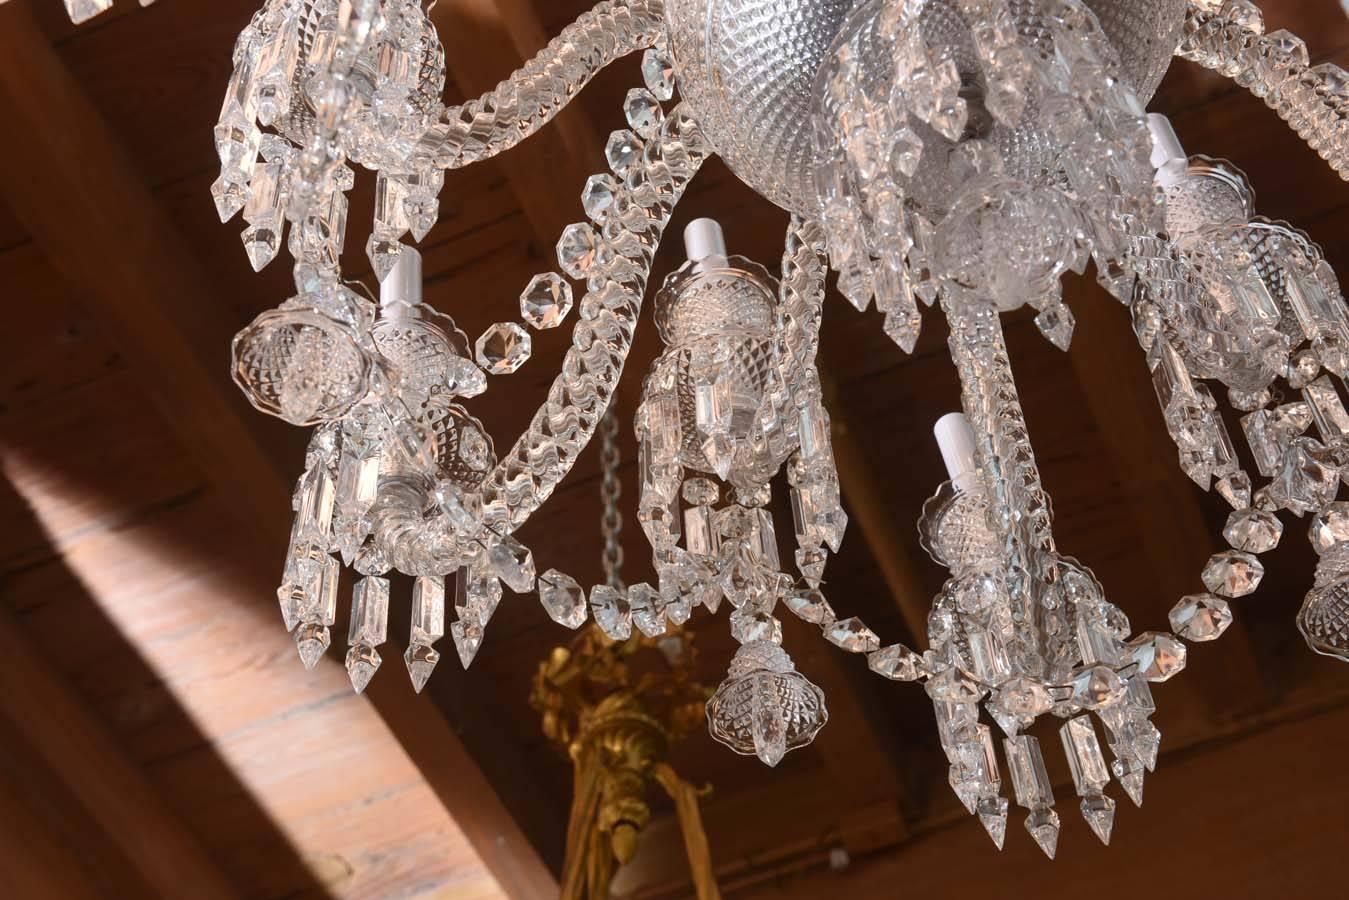 Pair of Baccarat Glass Twelve-Arm Chandeliers, Signed Baccarat 2